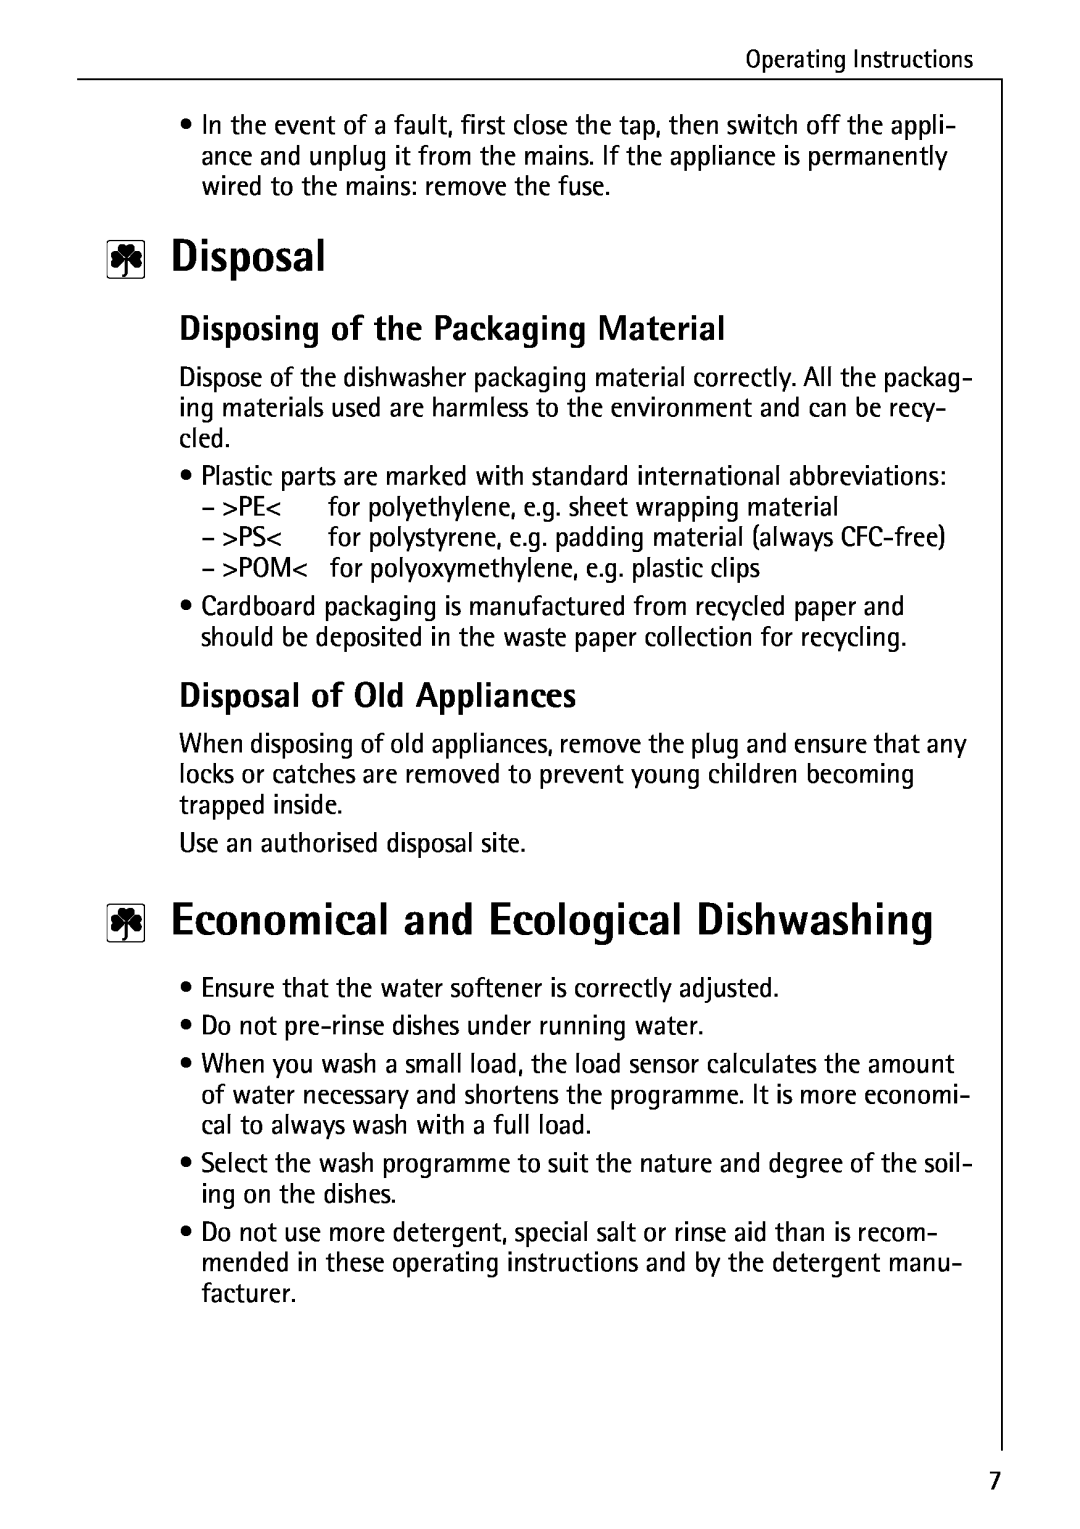 Electrolux FAVORIT 40630 manual Disposal, Economical and Ecological Dishwashing, Disposing of the Packaging Material 